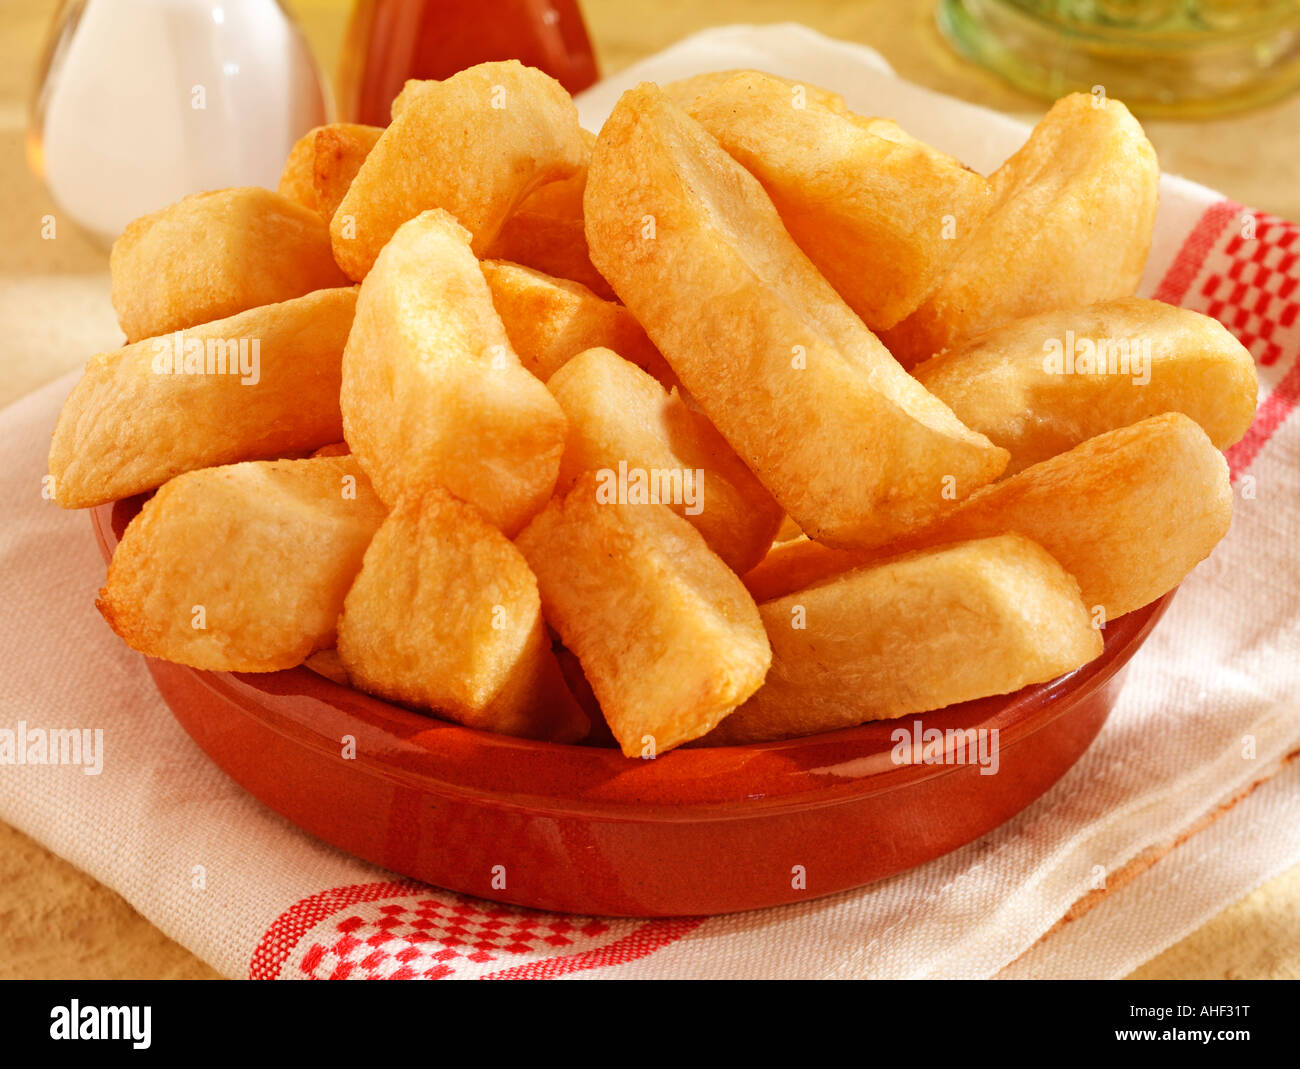 CHUNKY FRIED POTATO CHIPS OR THICK CUT FRENCH FRIES Stock Photo